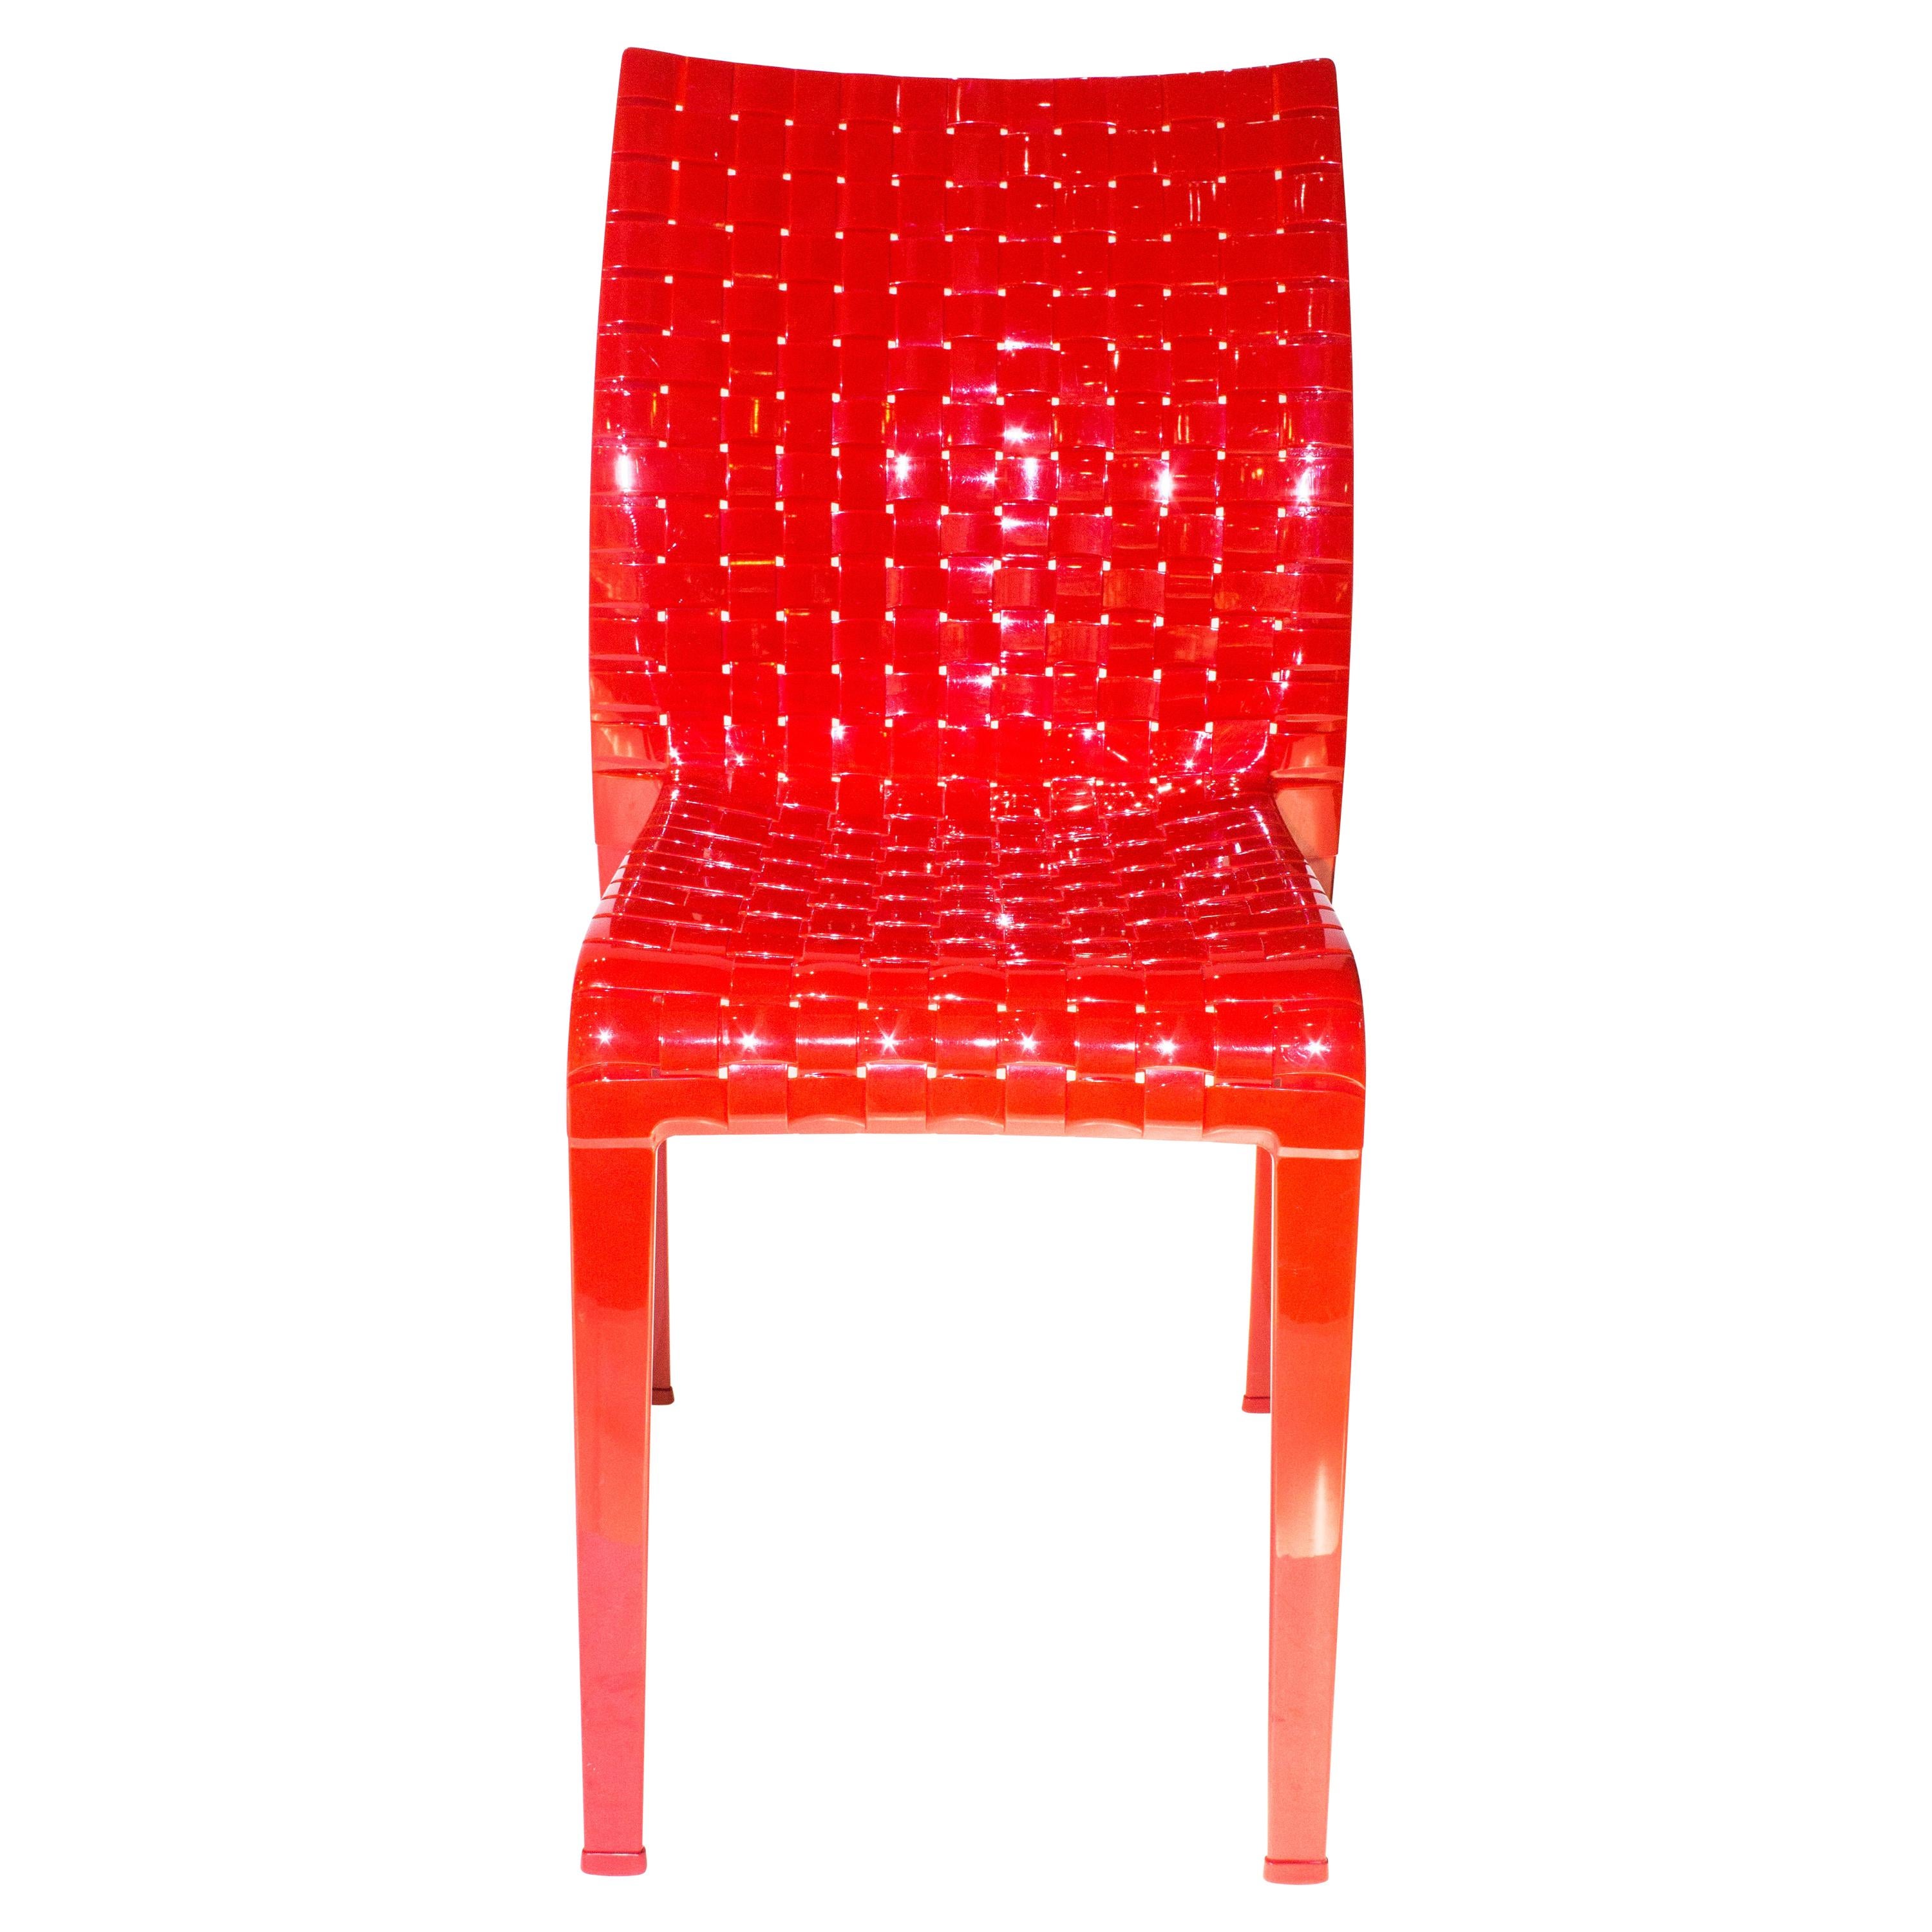 Kartell Ami Ami Chair in Red by Tokujin Yoshioka